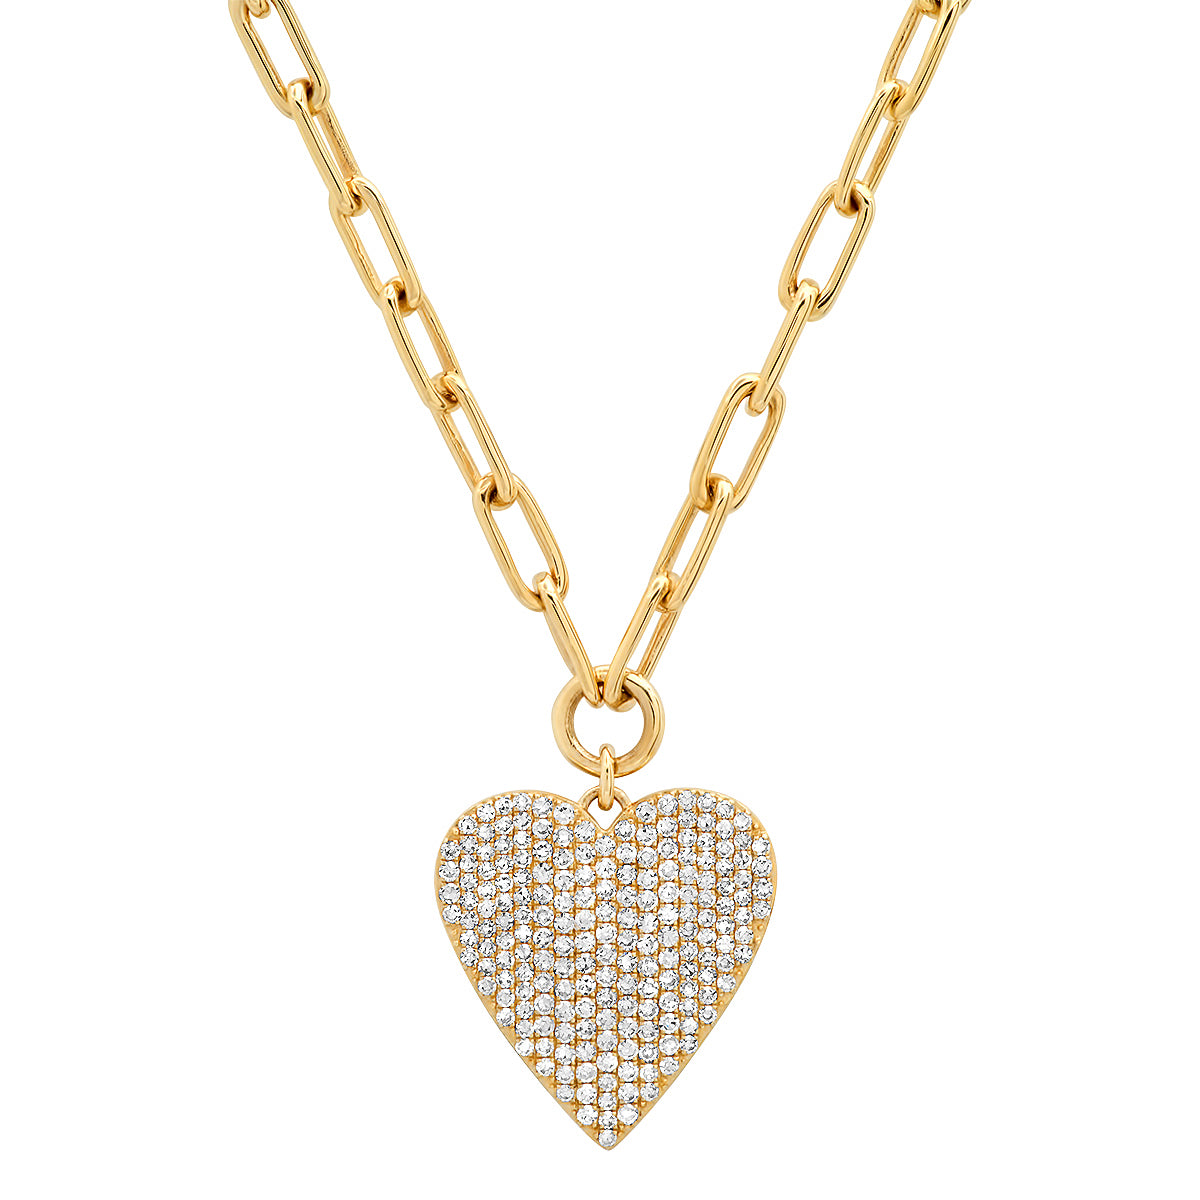 Perfect Pave Diamond Heart on Paperclip Chain Necklace